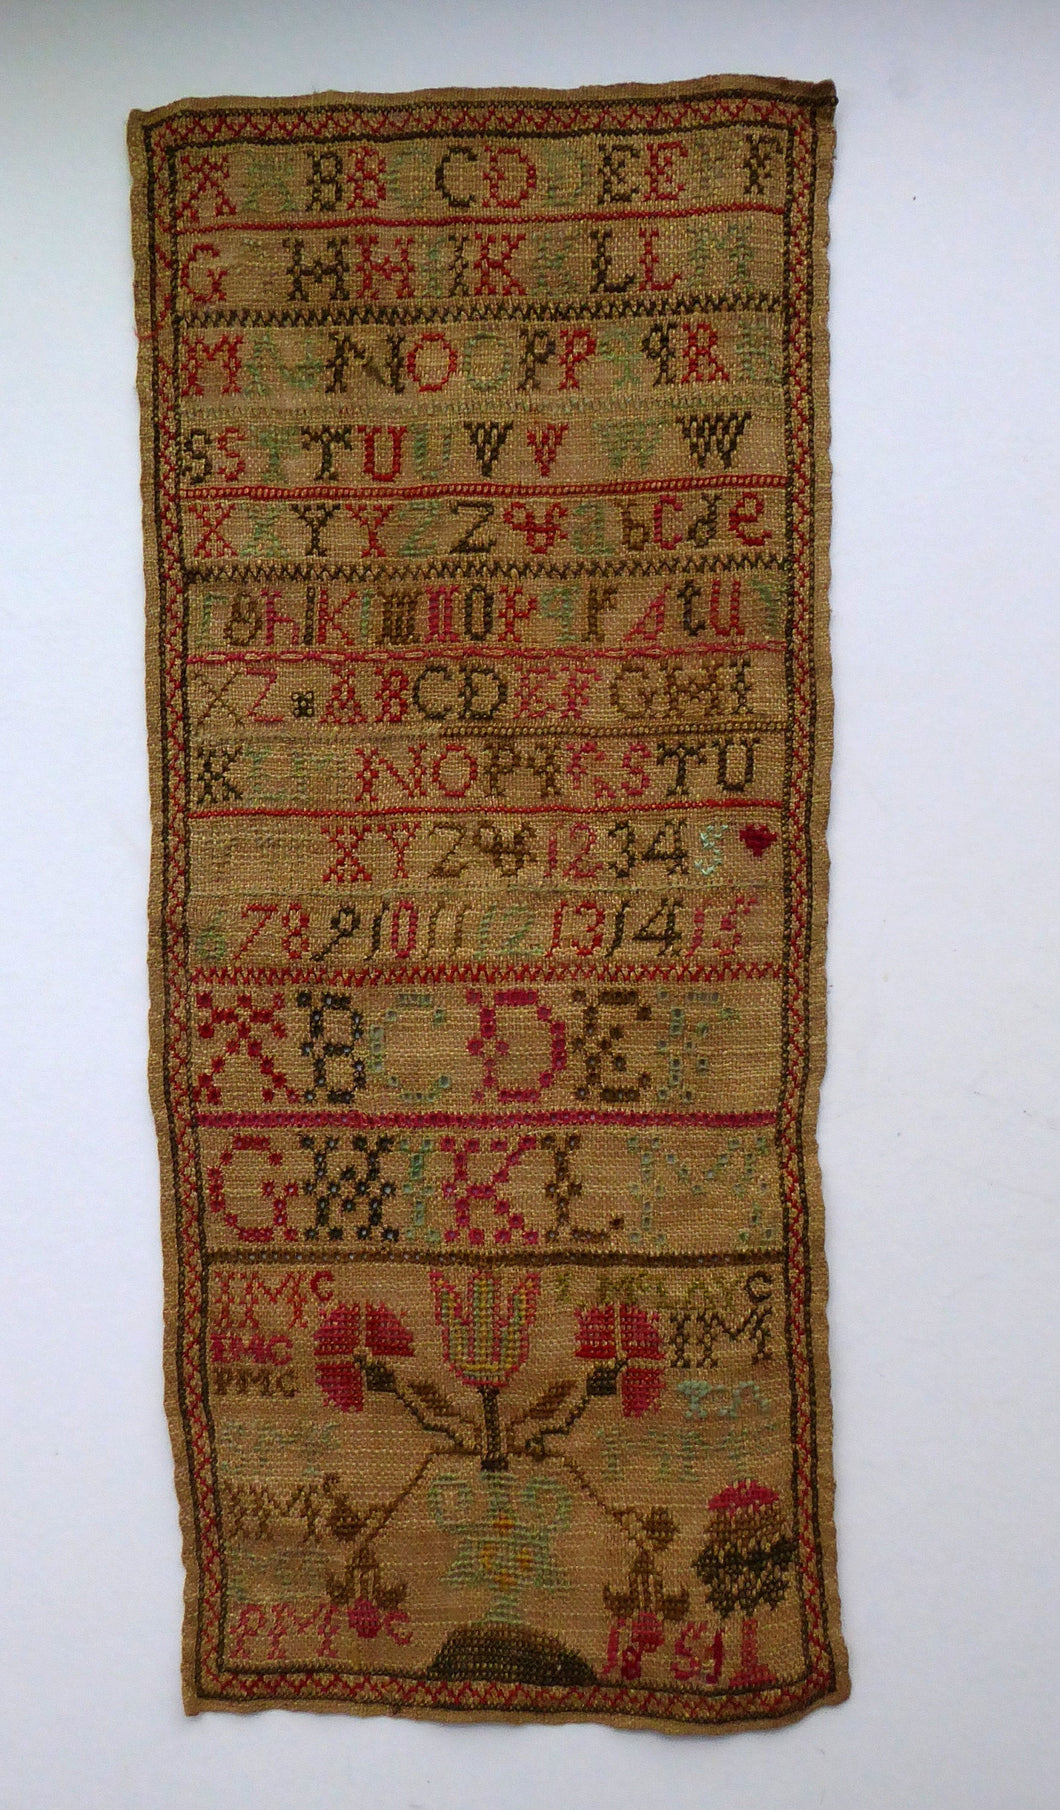 1851 ANTIQUE Embroidered Sampler. Genuine Early Victorian Scottish Textile by I. McLay